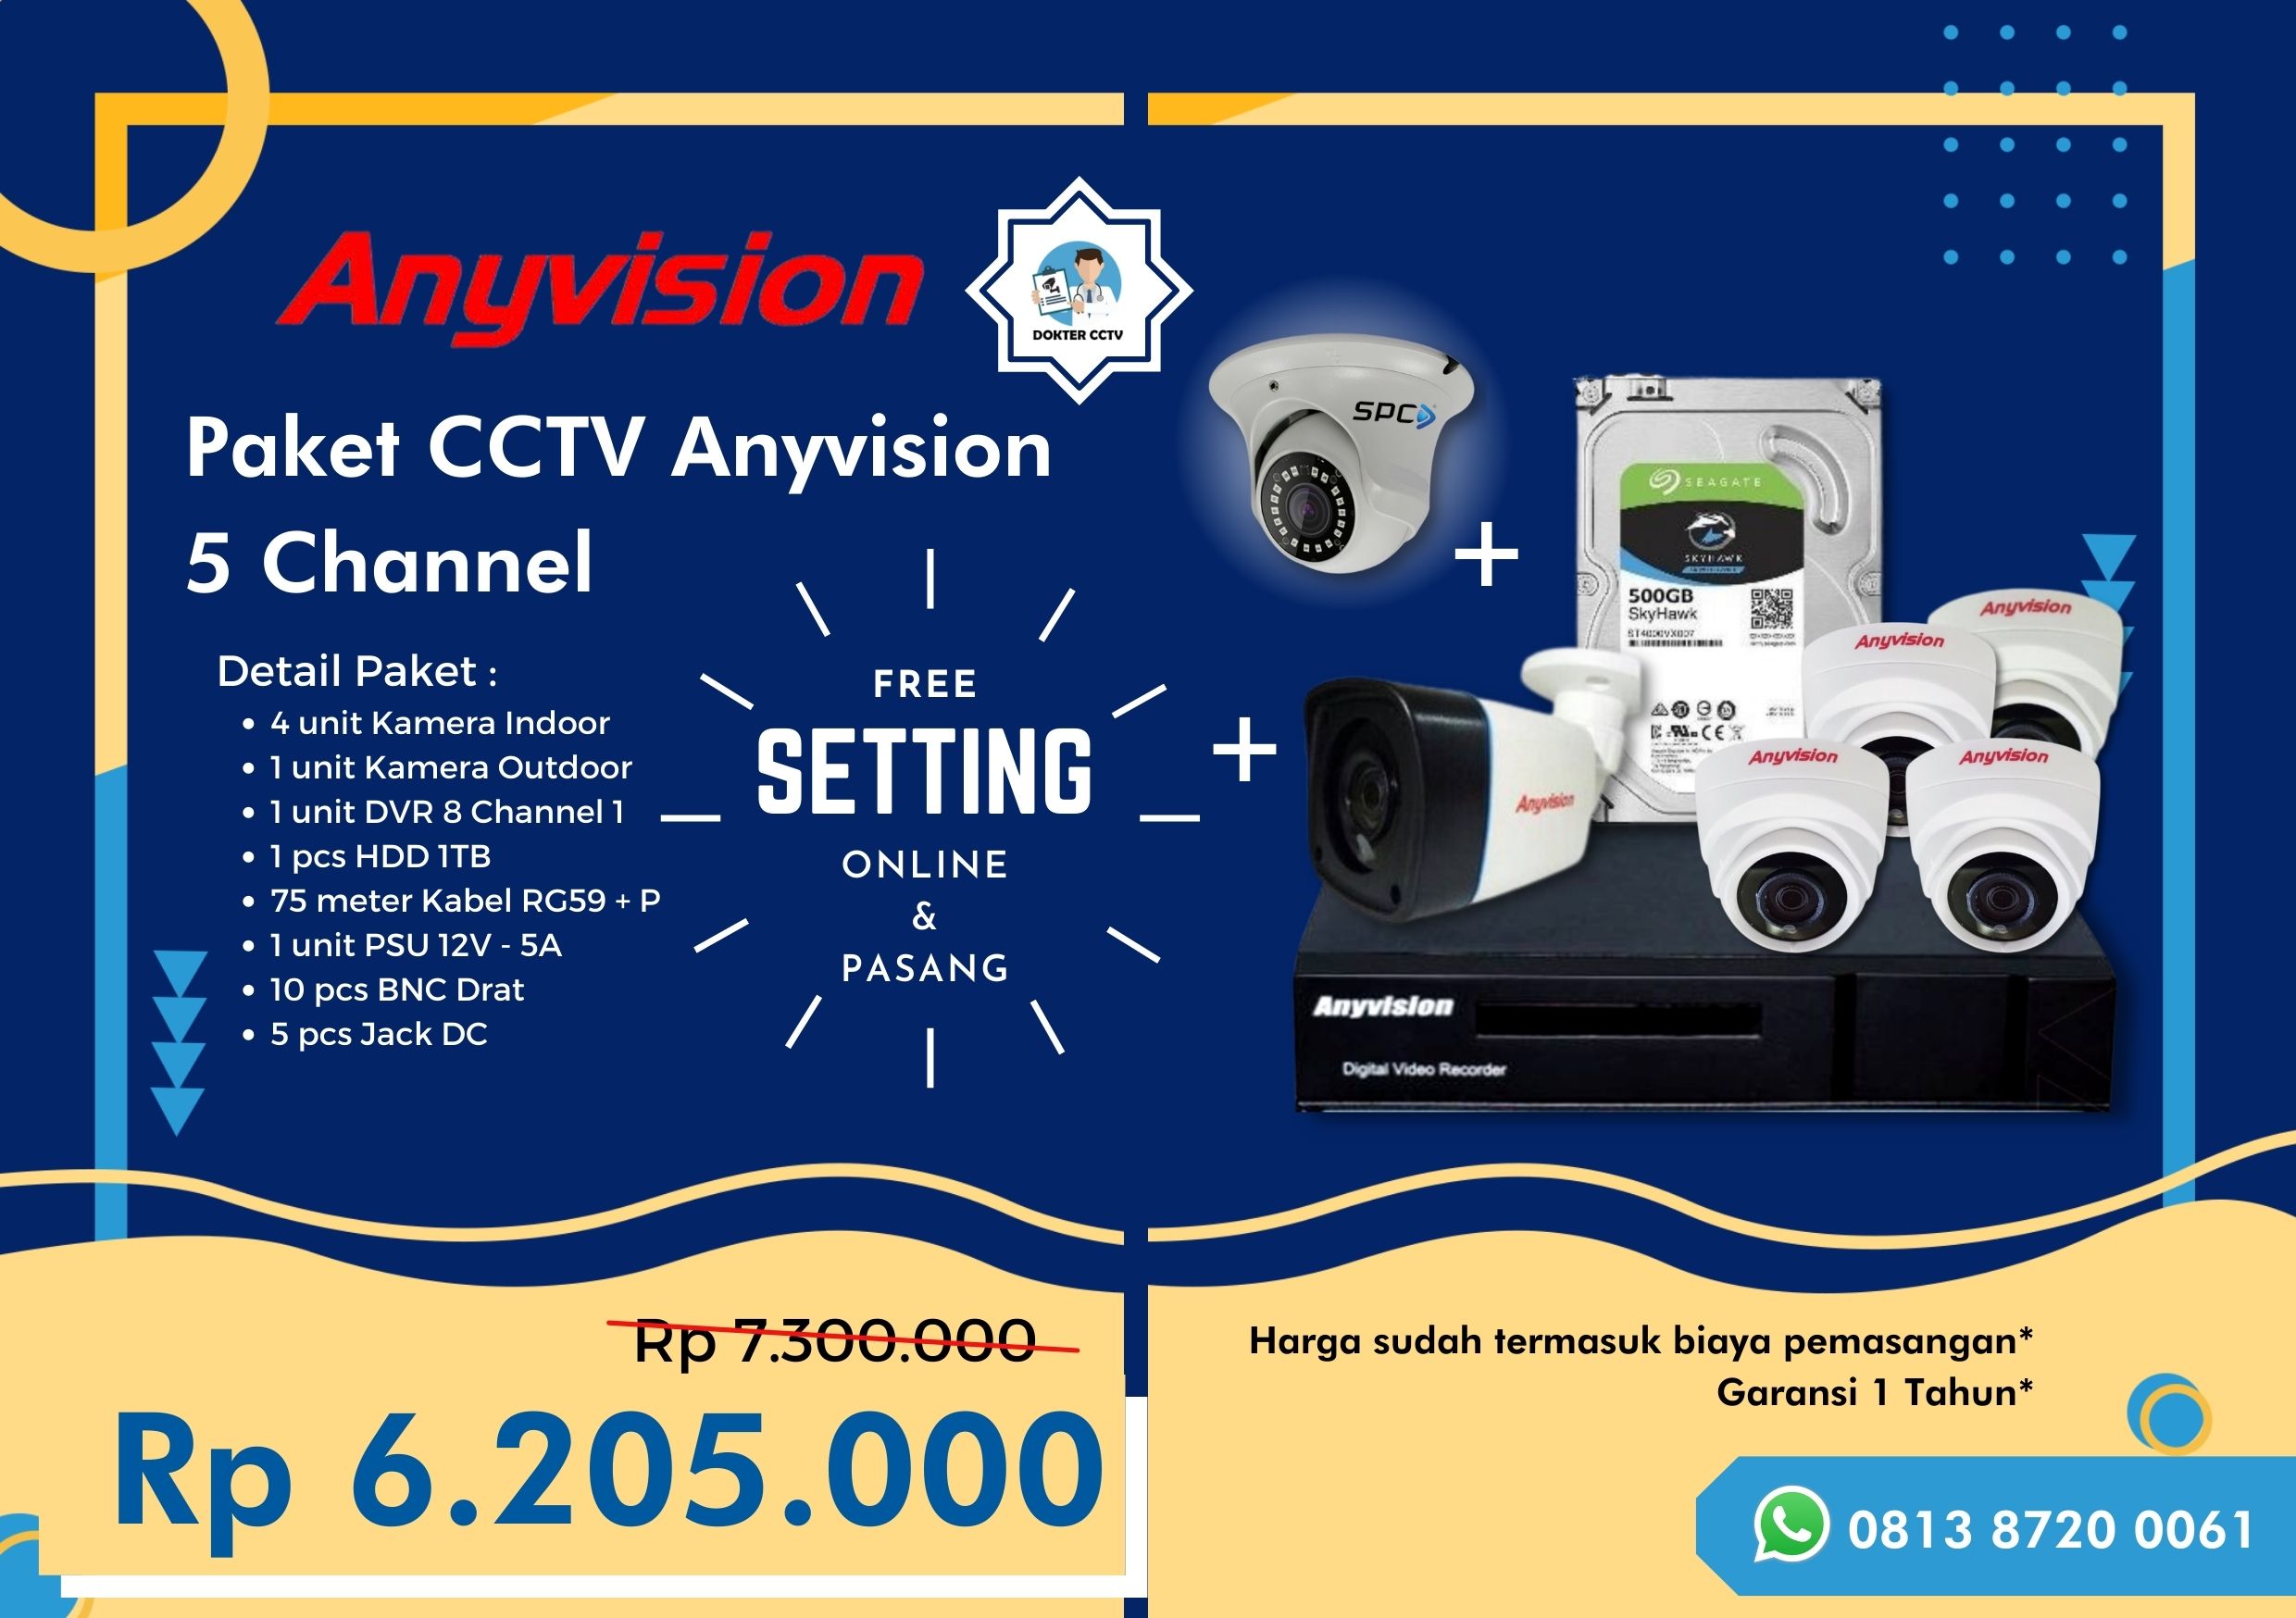 Paket CCTV Anyvision 5 Channel